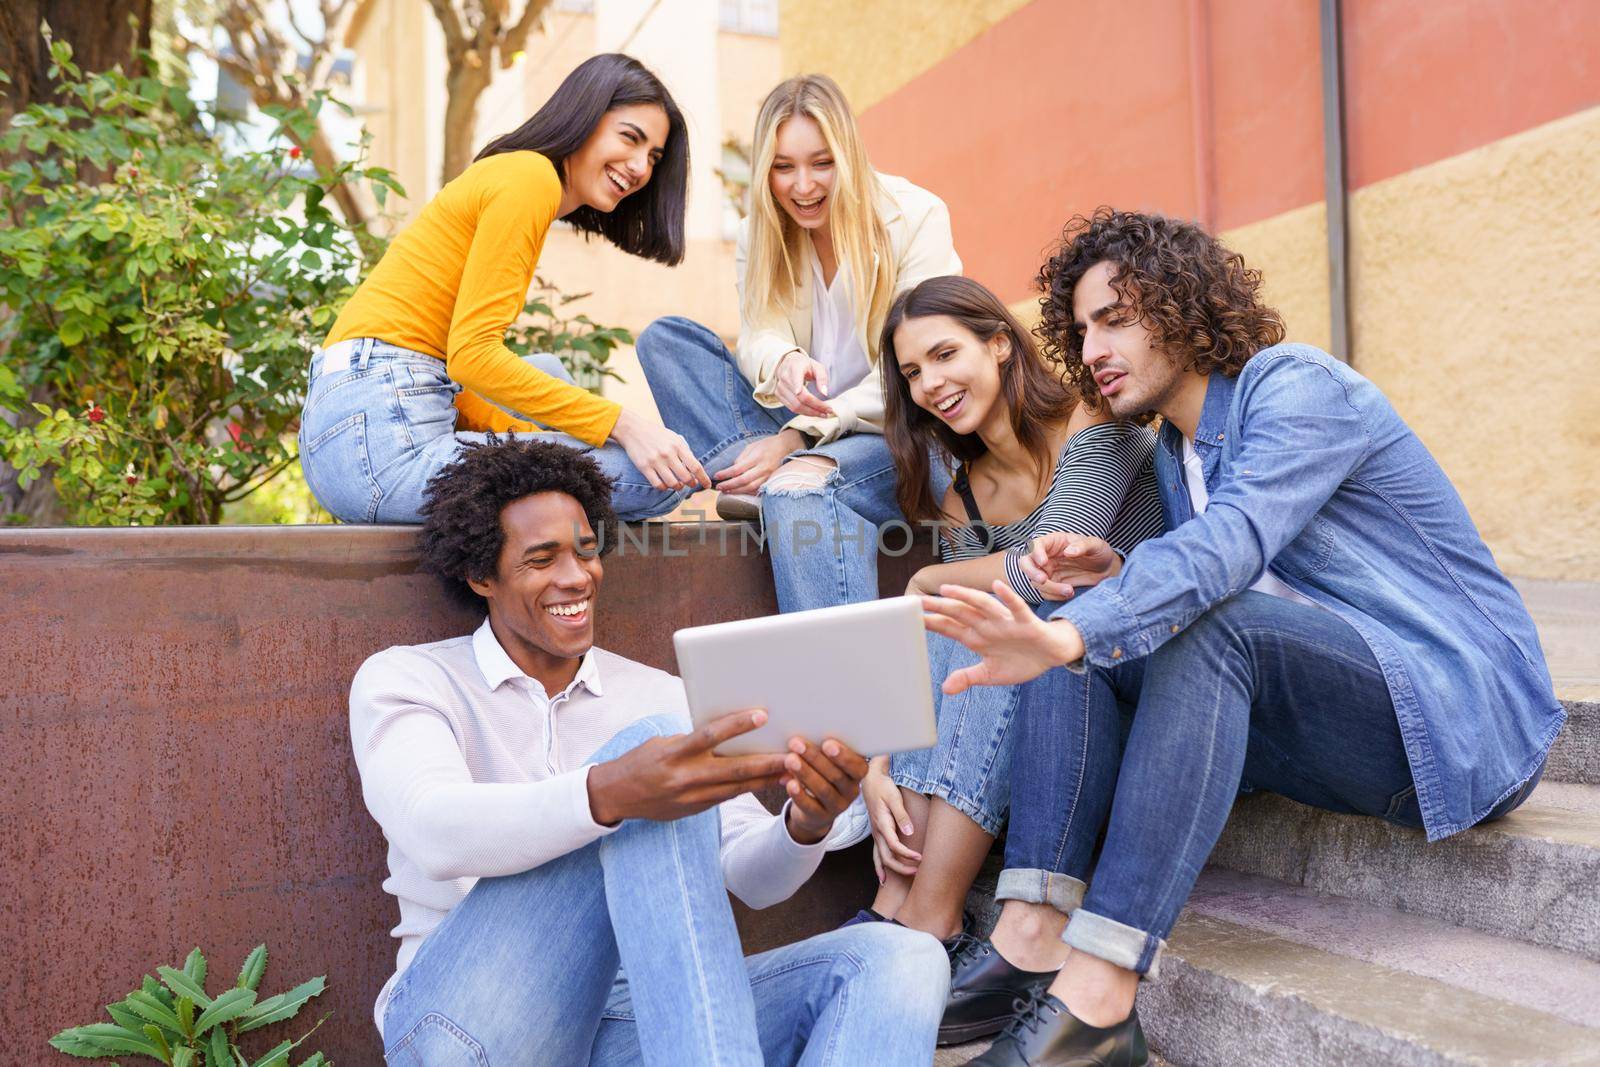 Young black man showing something on his digital tablet to his group of friends sitting on some steps in the street.